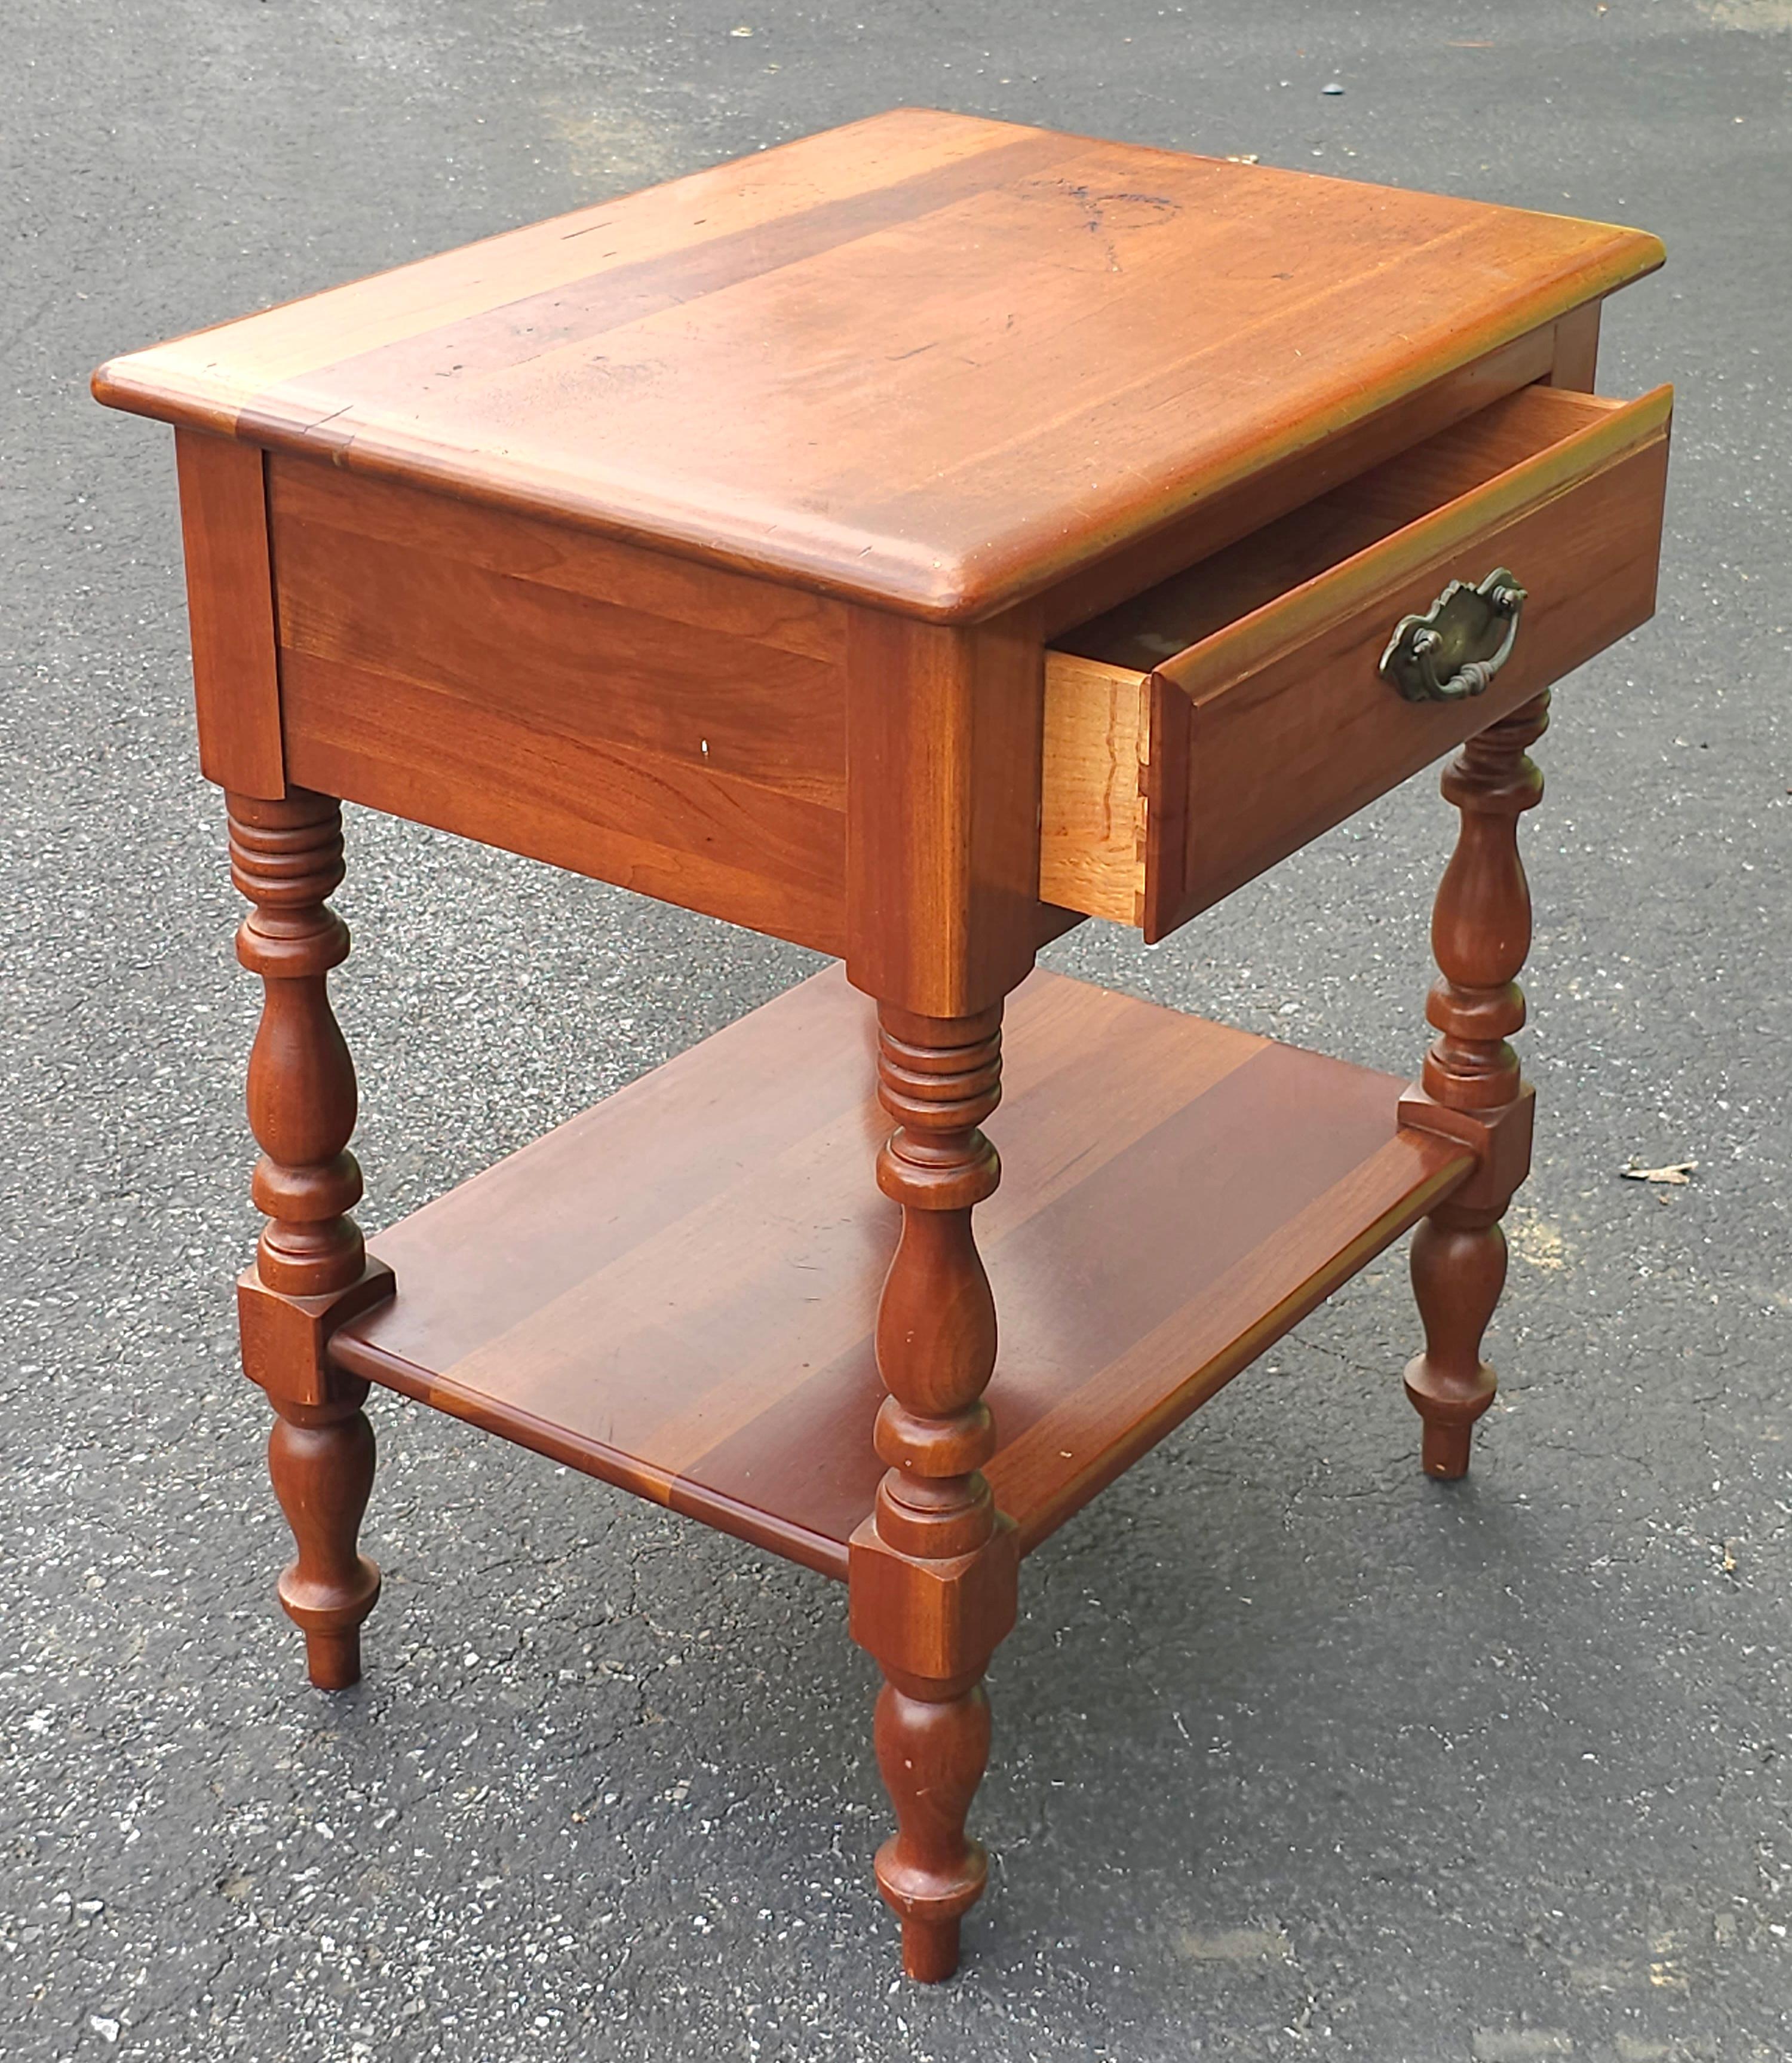 A mid Century Jamestown Furniture Maple Two Tier Single Drawer early American style Side Table. Measures 22